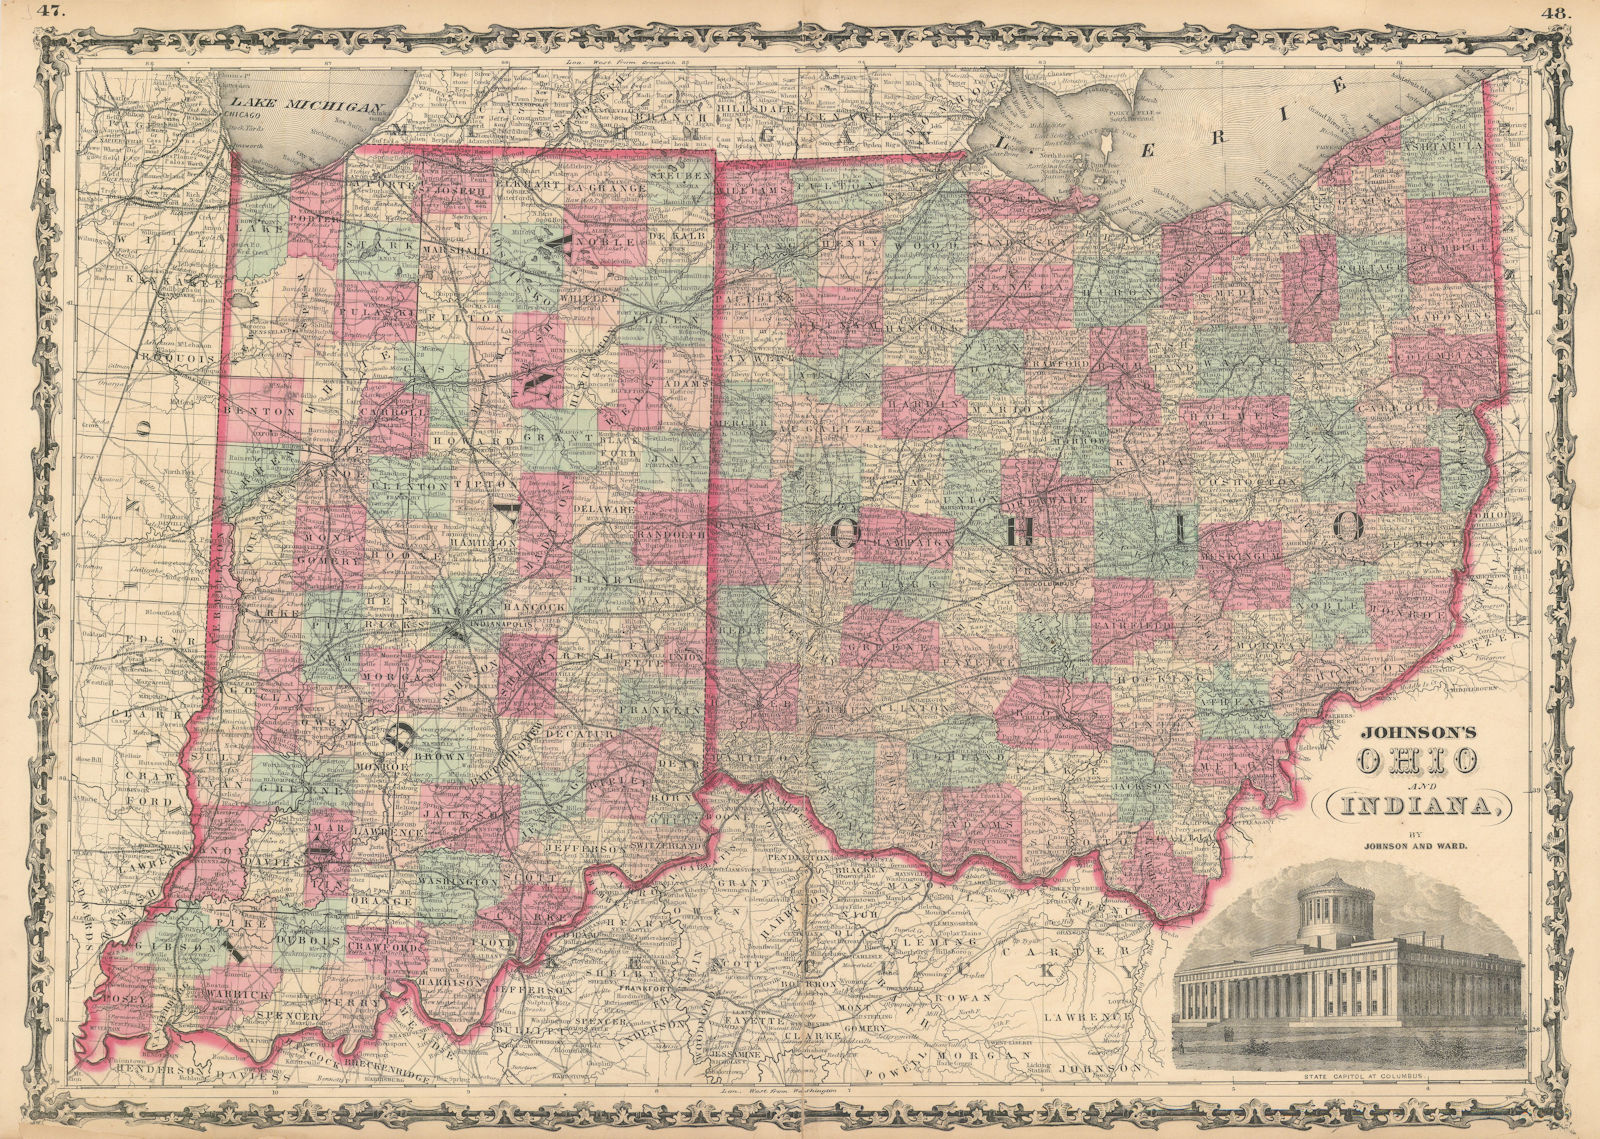 Associate Product Johnson's Ohio & Indiana. US state map showing counties 1862 old antique